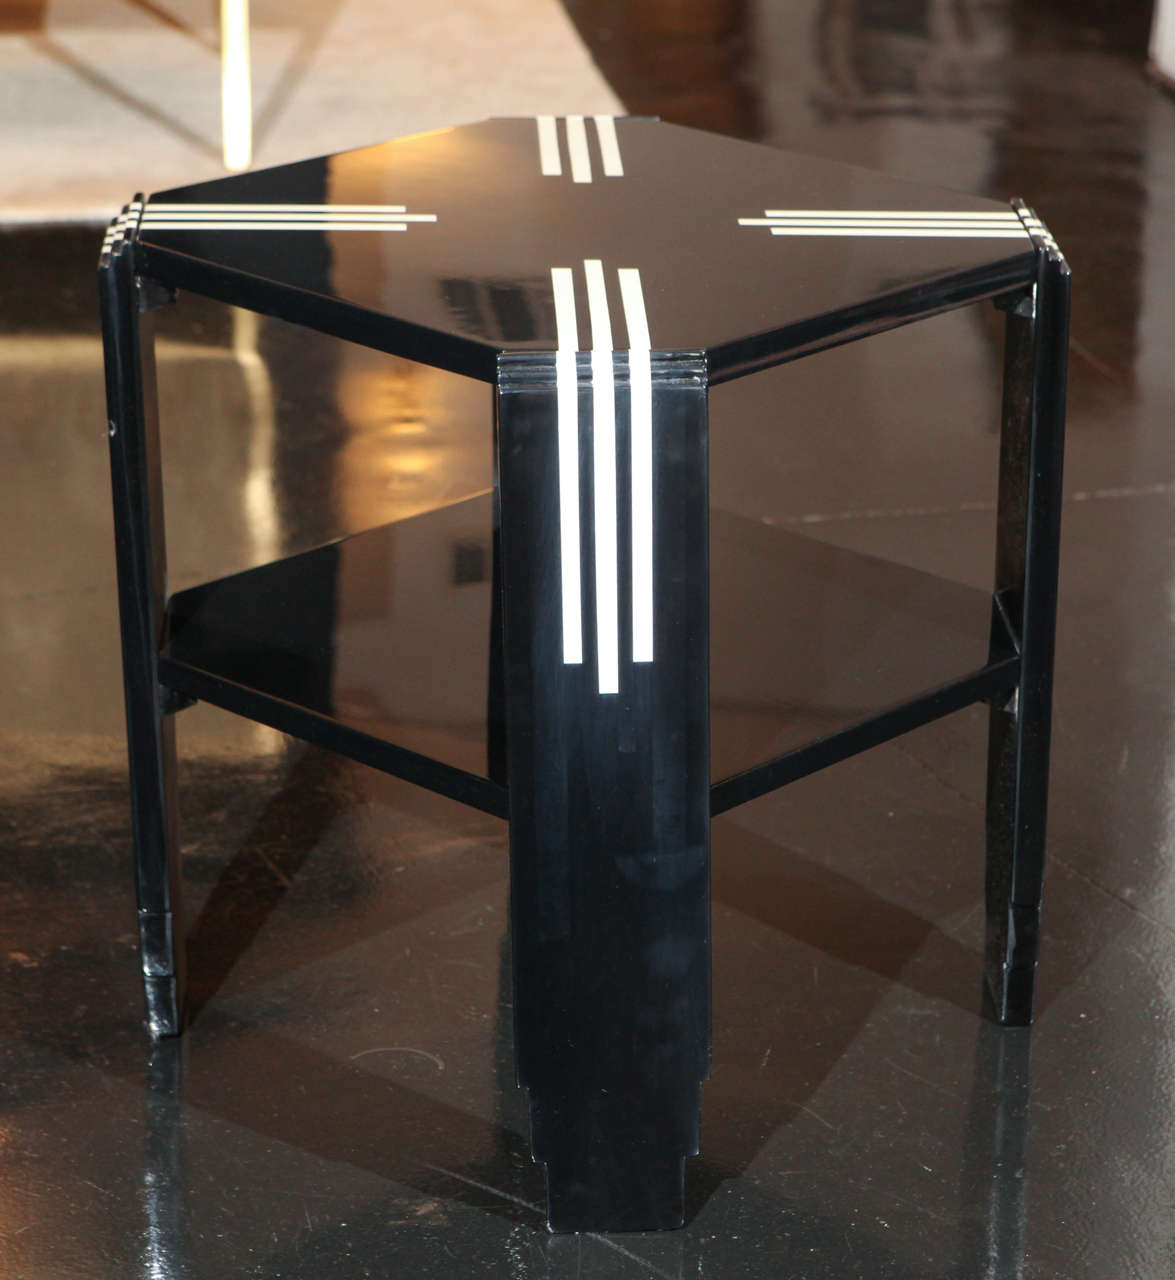 Art Deco-Modernist side table in black lacquer with ivory lacquer linear detailing along legs and top. 2-tier octagonal shape with stepped details on legs.